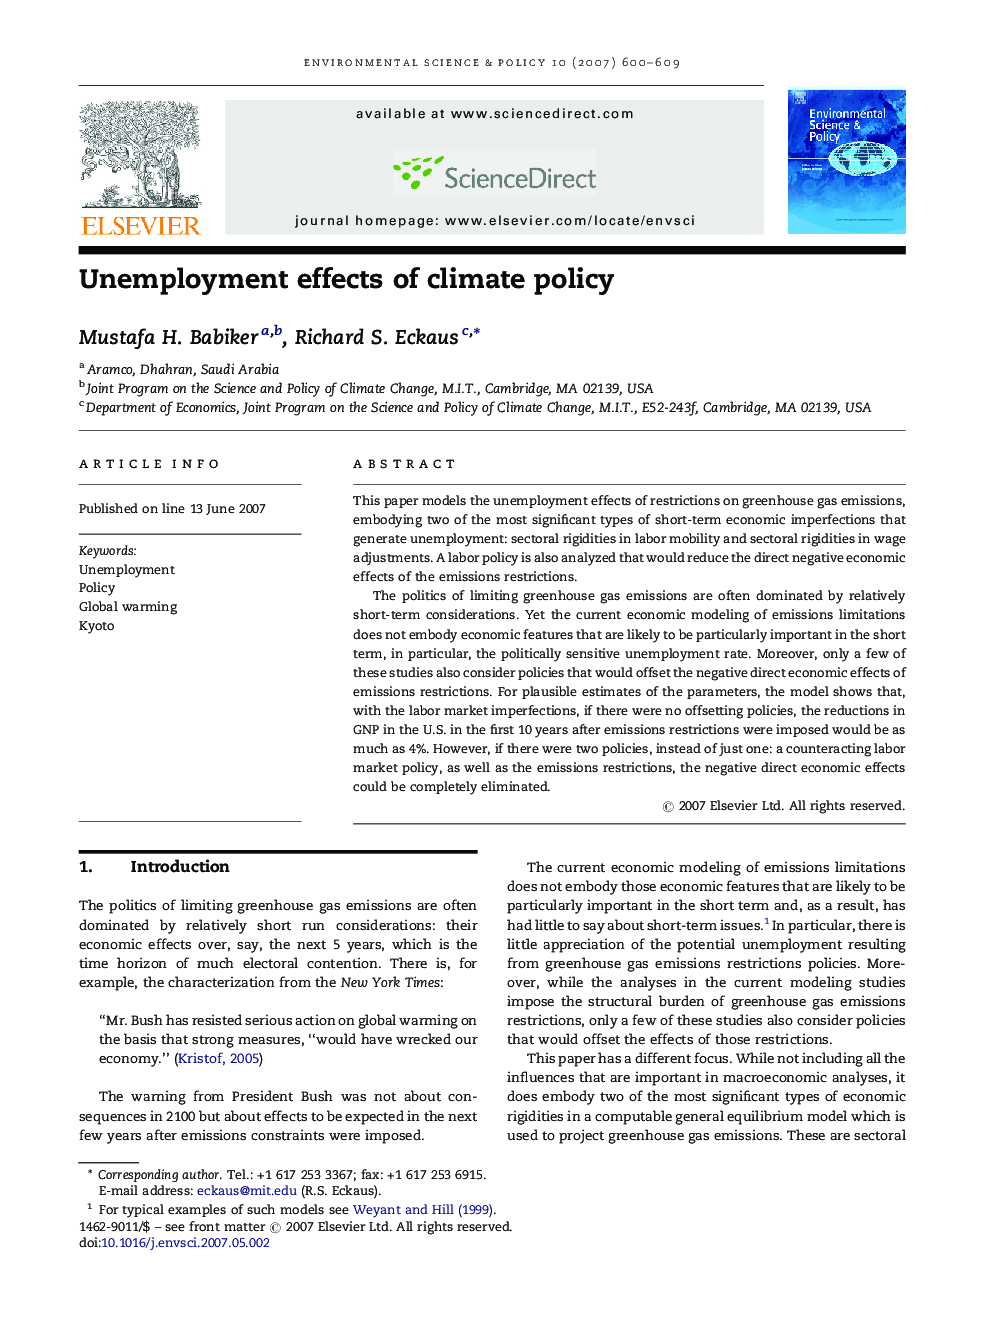 Unemployment effects of climate policy